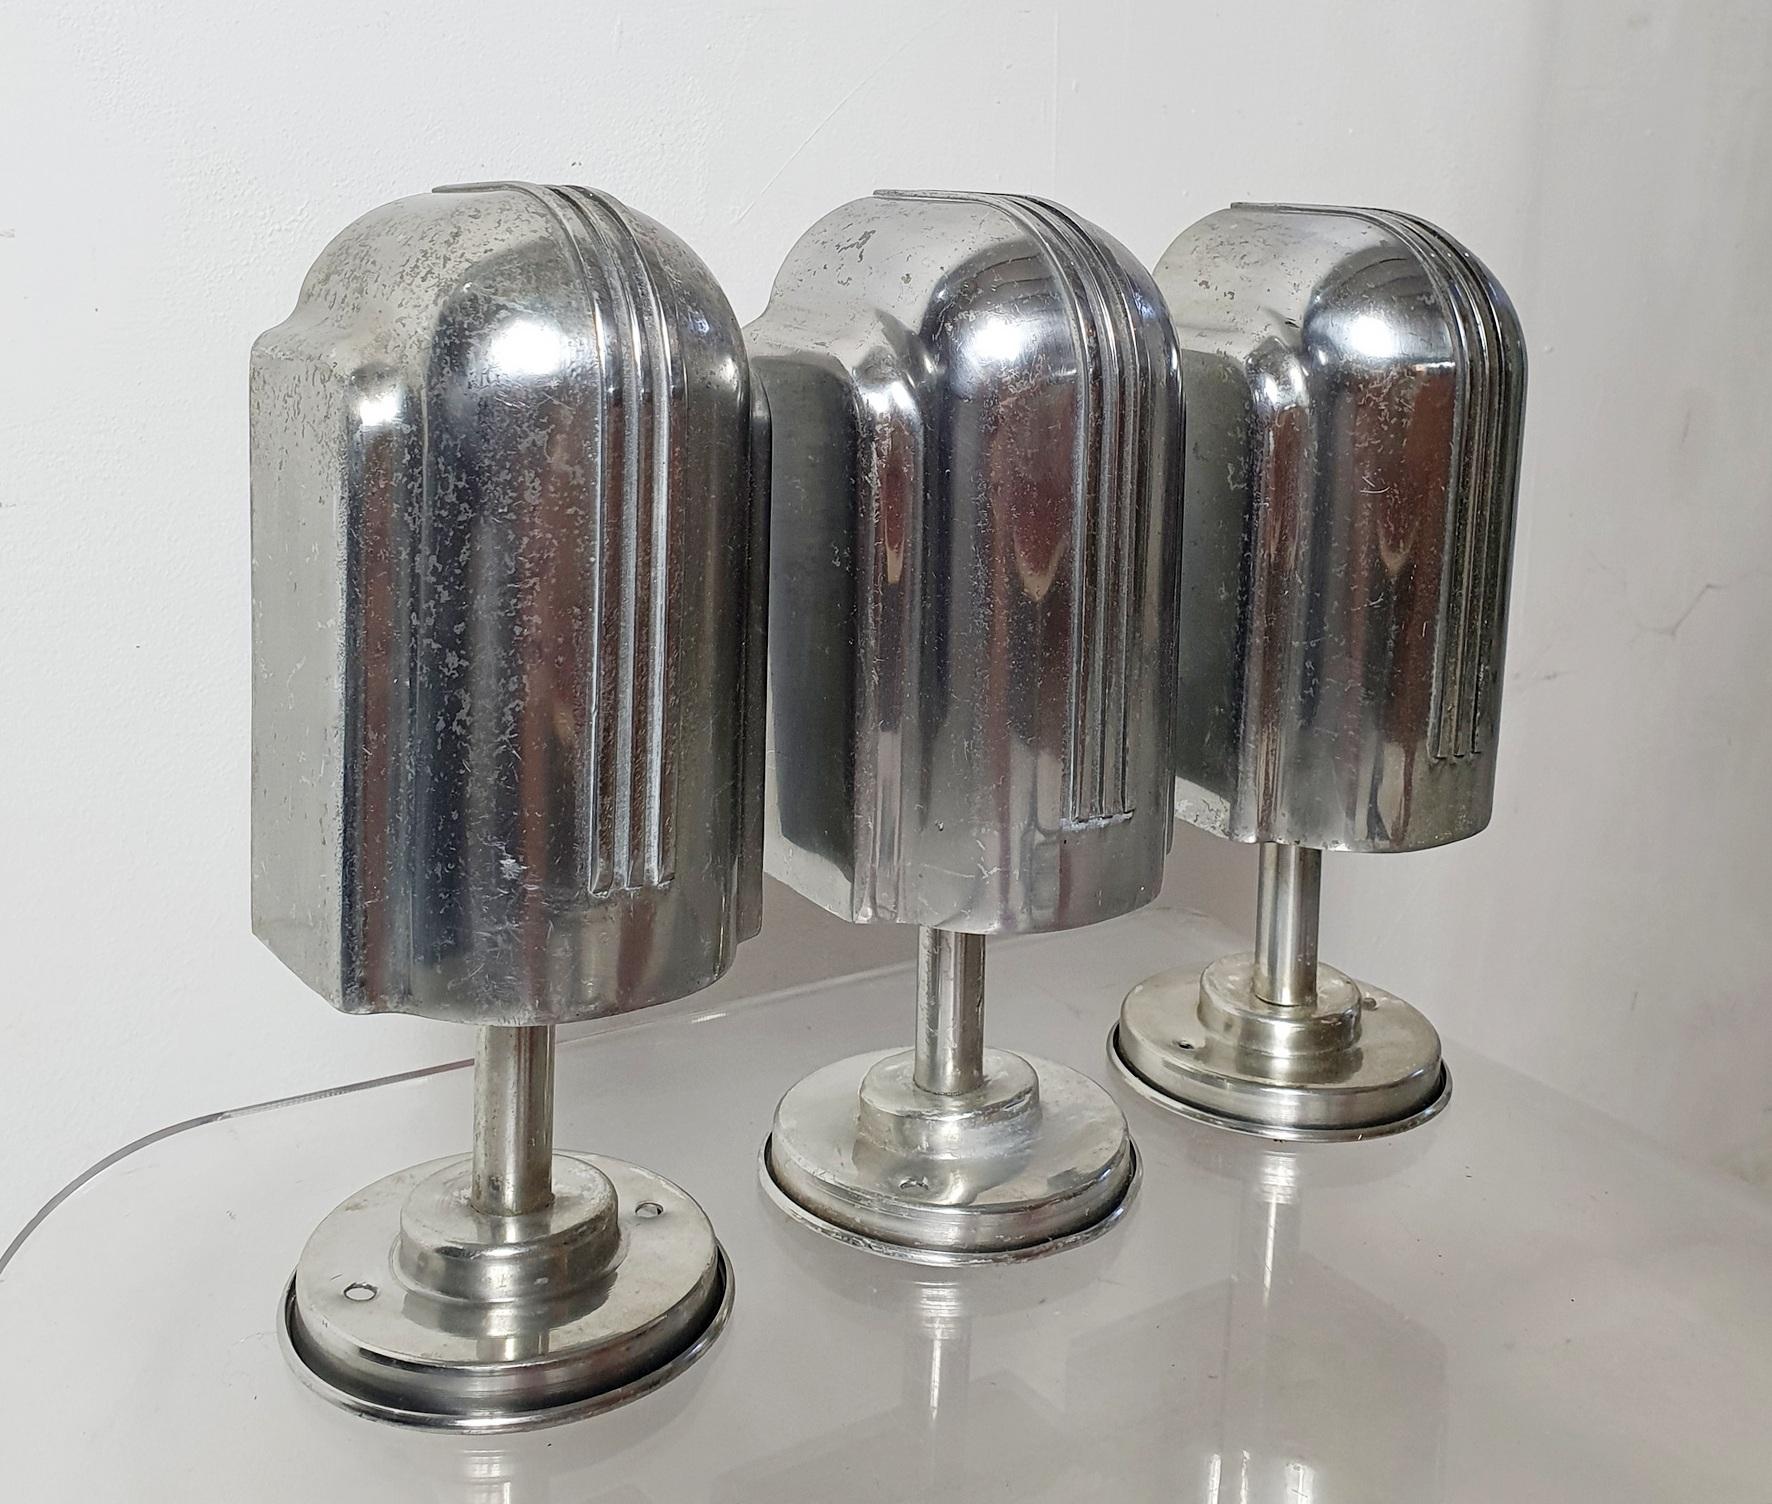 This is a rare set of three original wall sconces from the 1930's produced in italy in cast aluminium. Designed in a typical art deco style exuding elegance. Would work beautifully over the bookcase or as a spotlight. In nice condition with natural